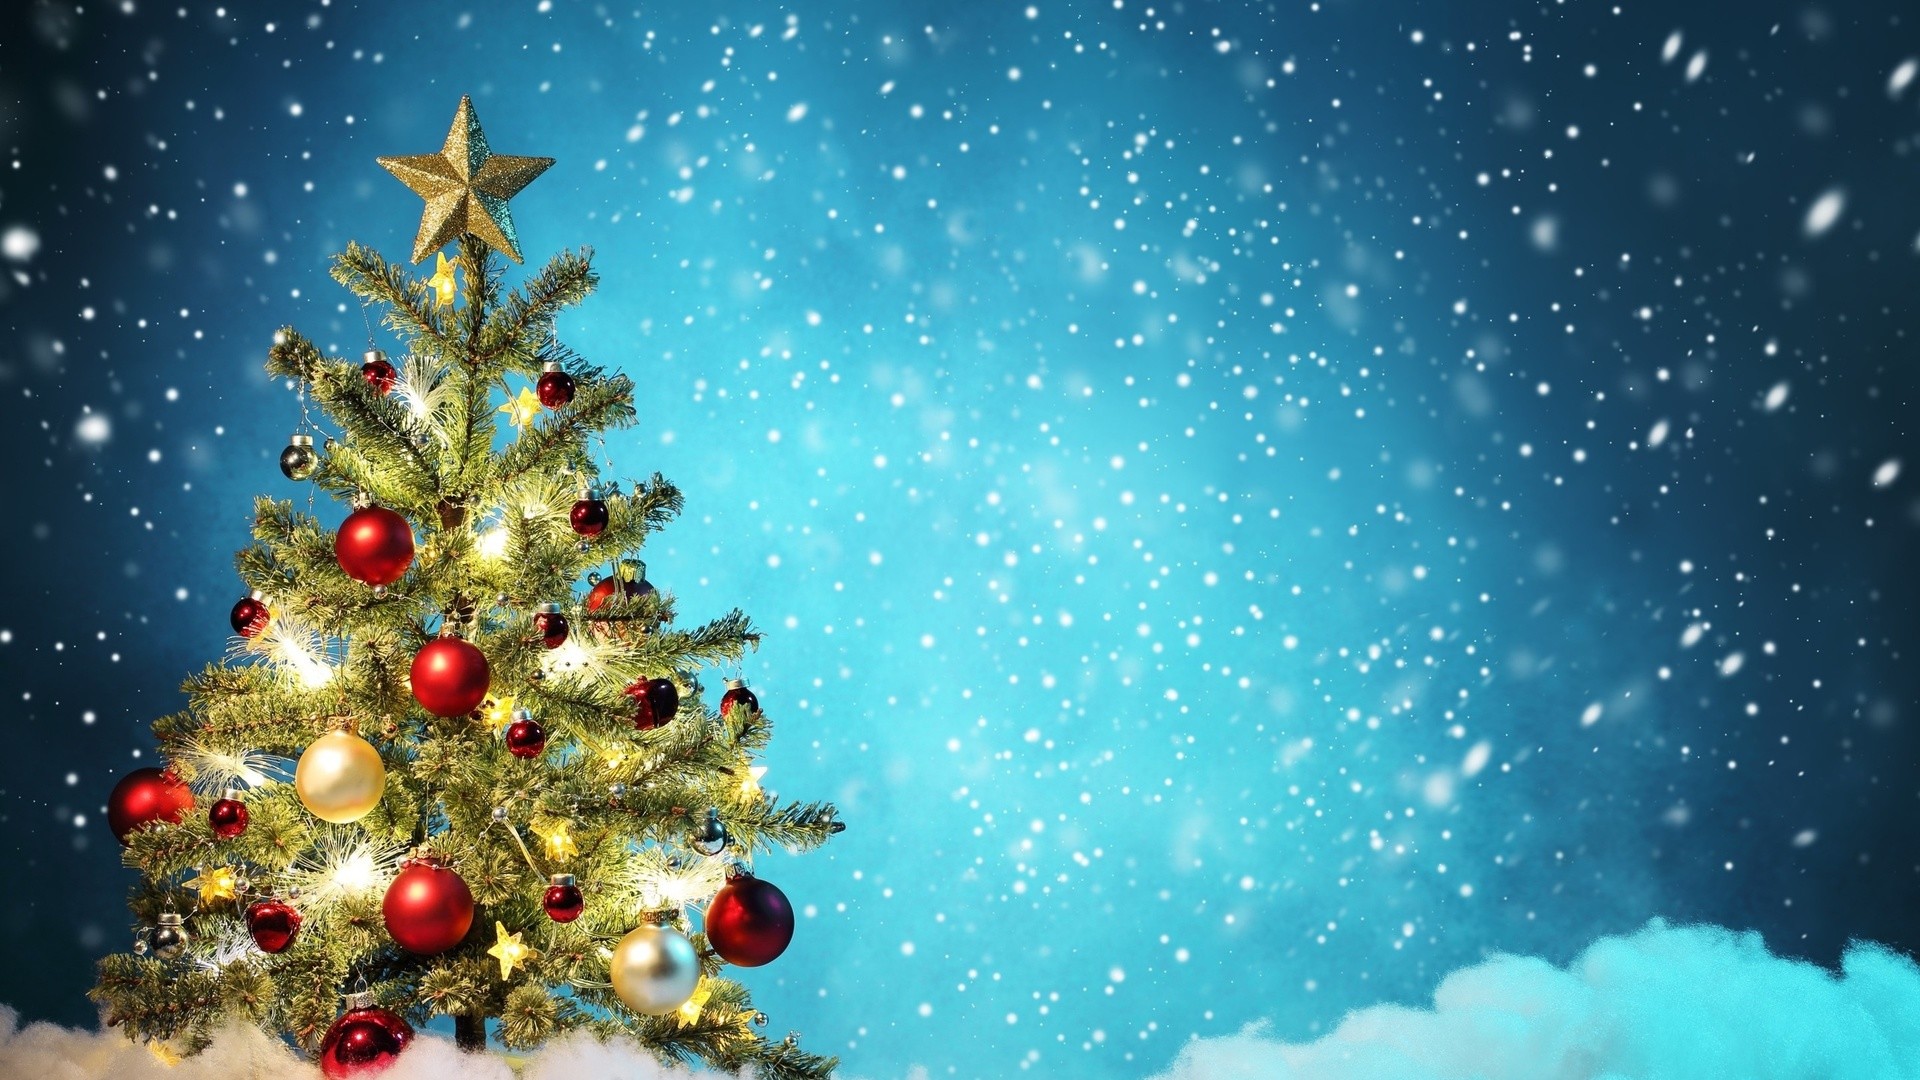 1920x1080 Pictures-Christmas-Backgrounds